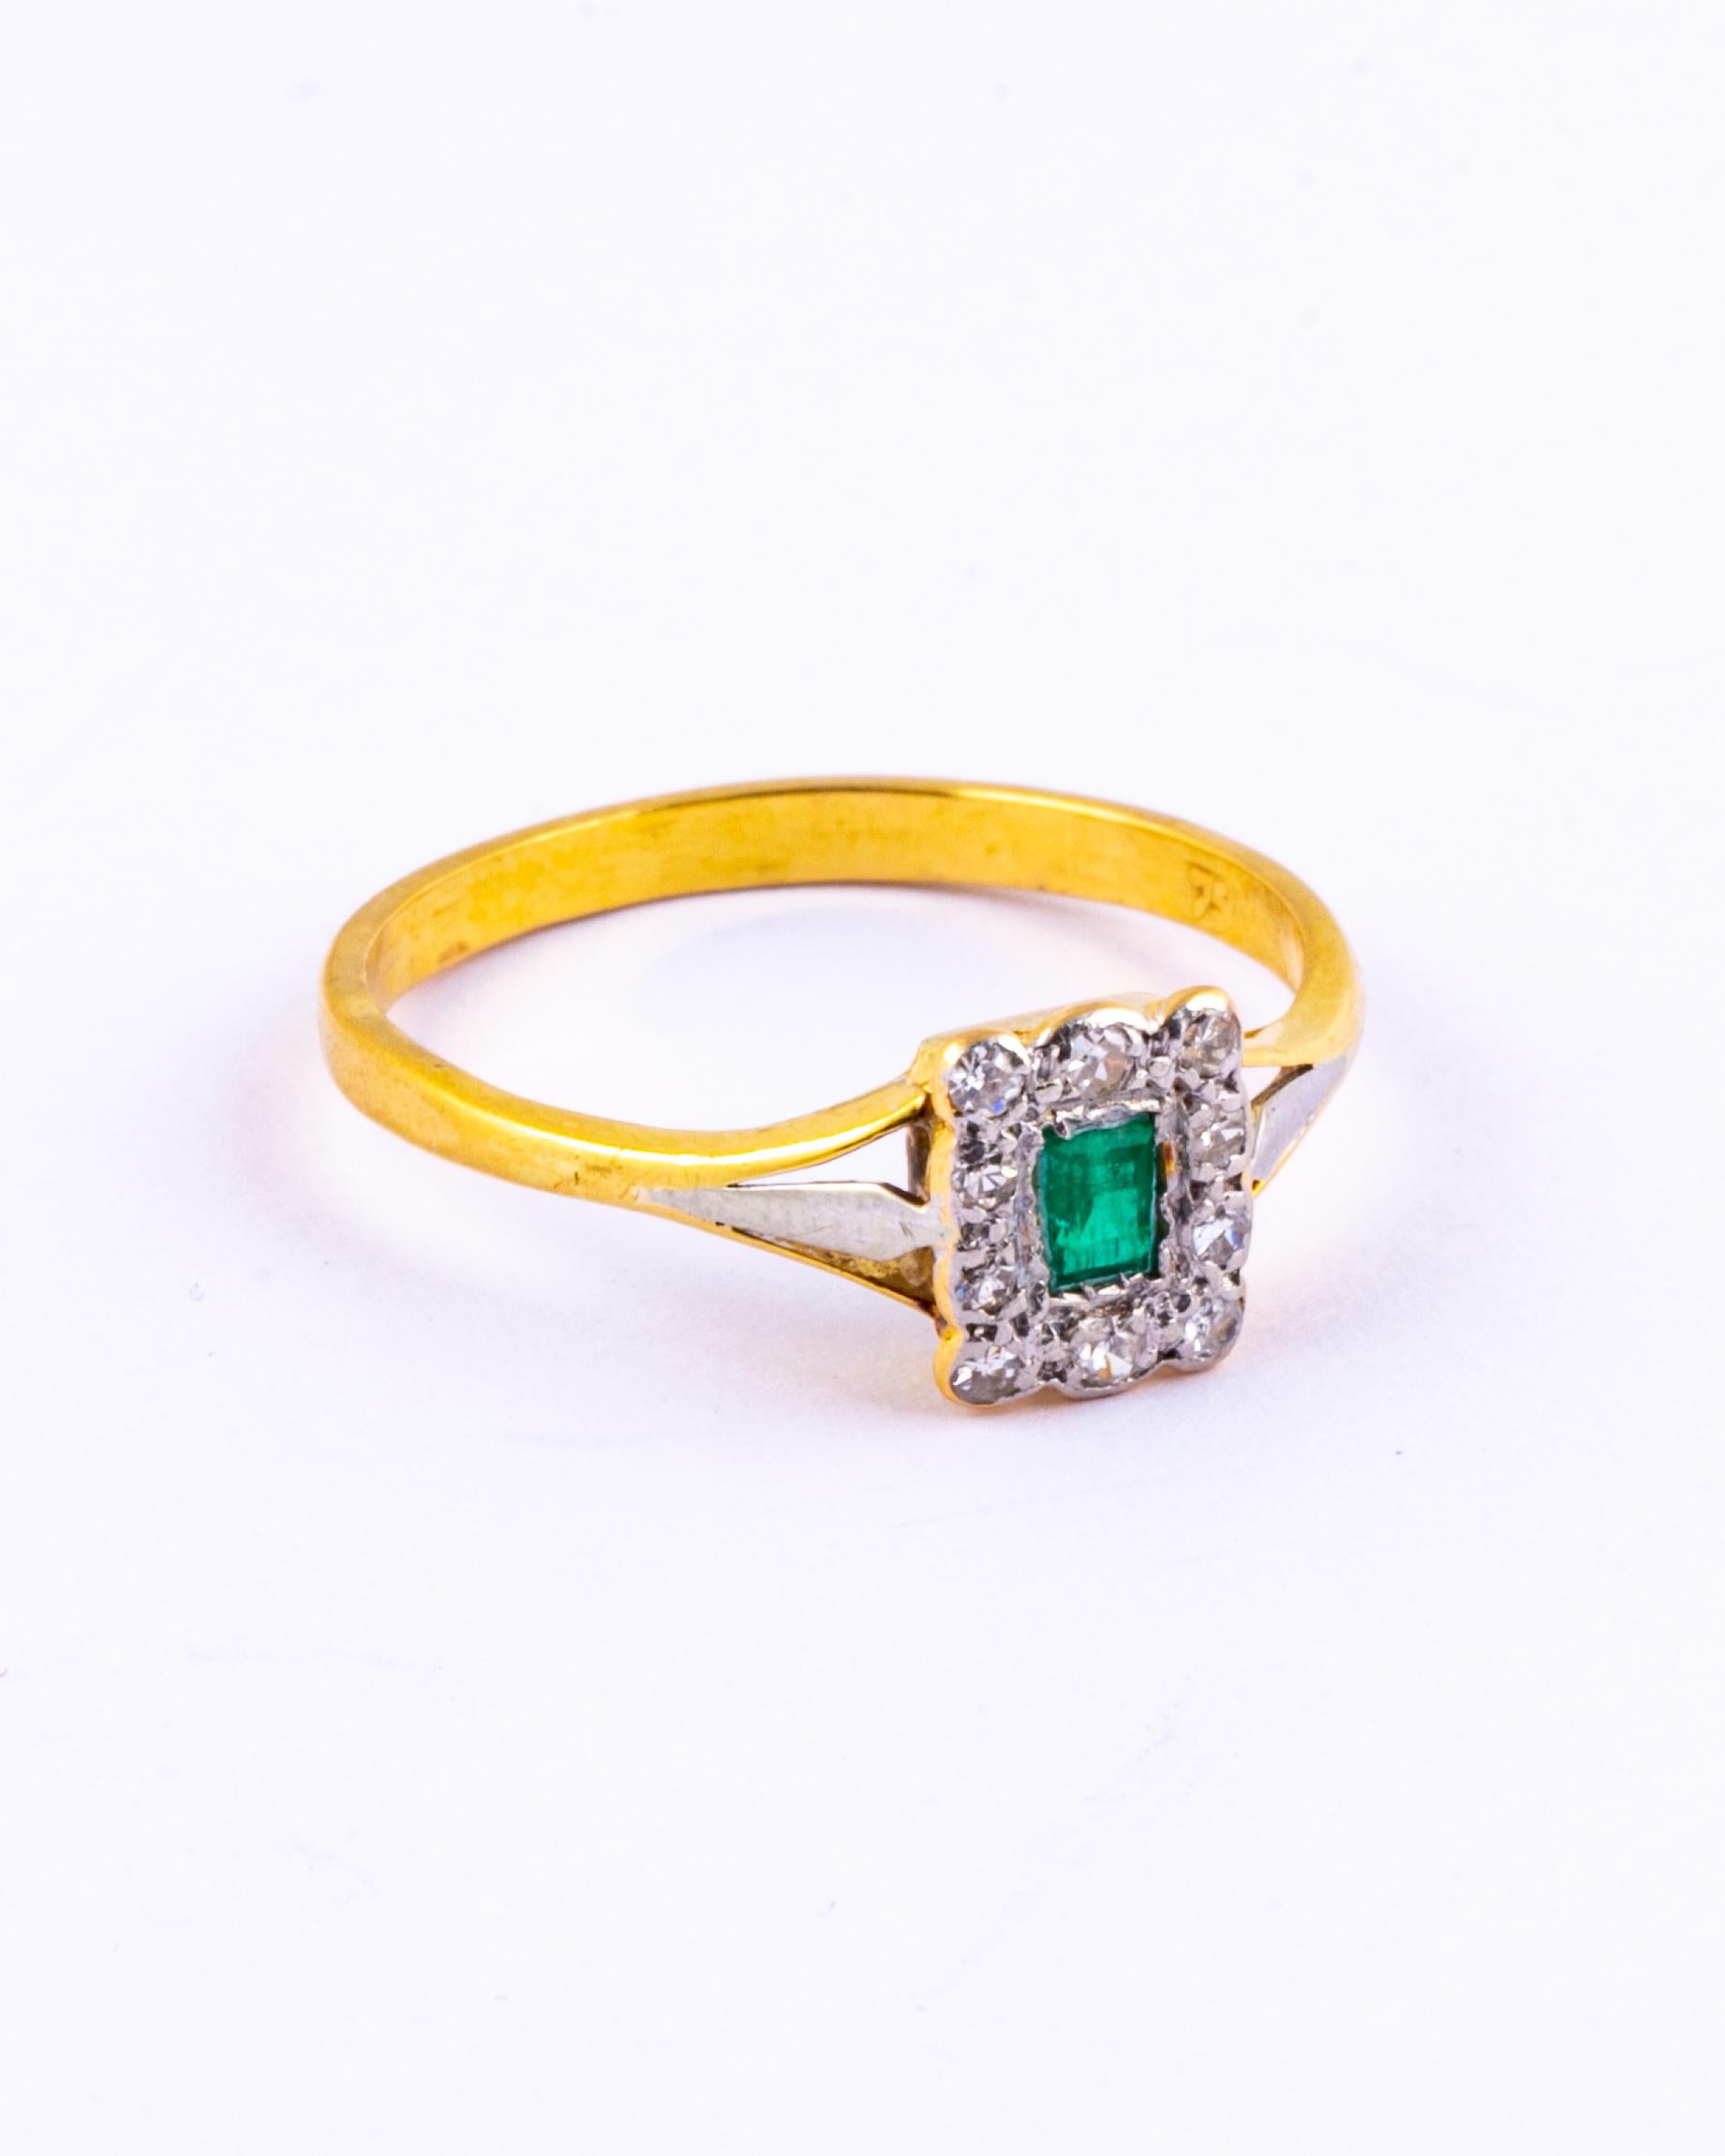 Cluster rings are so wearable and timeless. This particular cluster holds a bright gorgeous emerald at the centre and is encircled within a fabulous halo of diamonds. The emerald measures 10pts and the diamonds total 15pts. The stones are set in